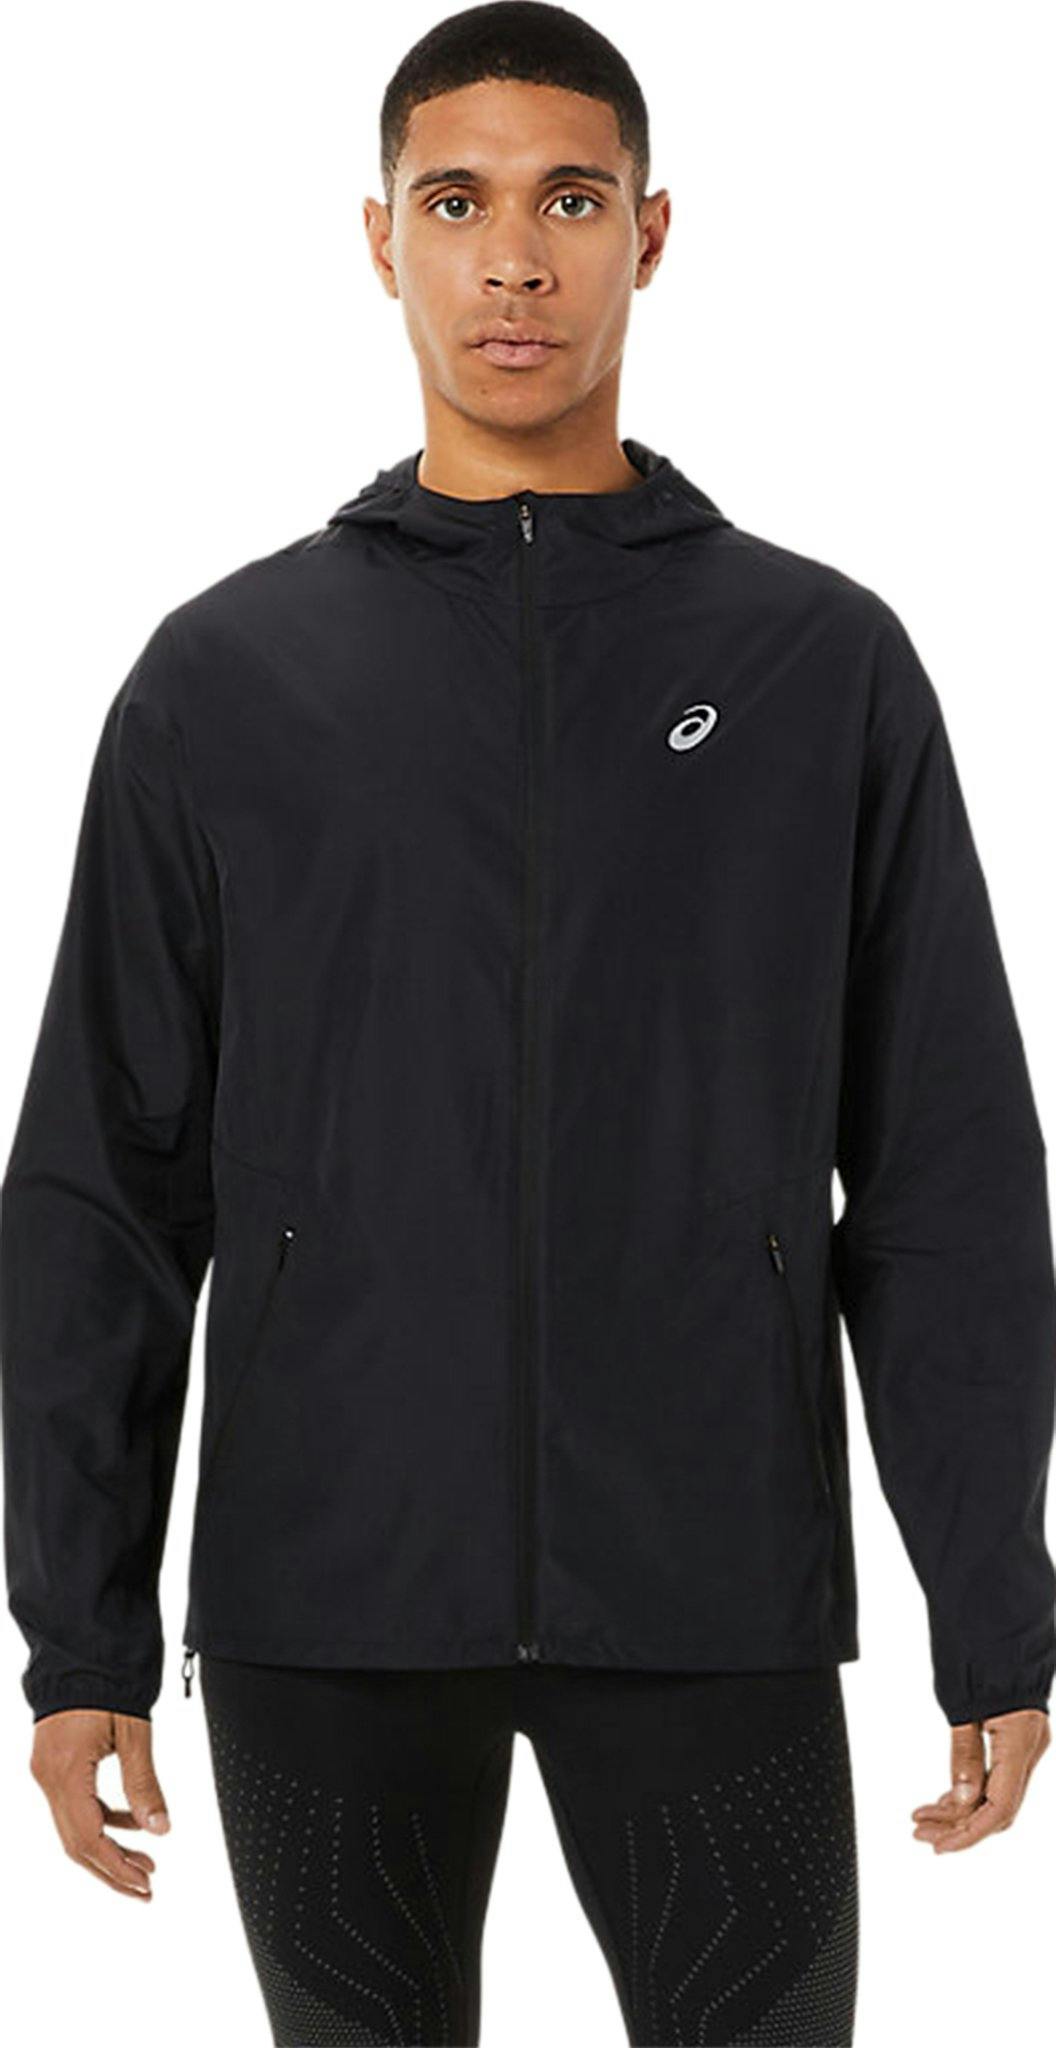 Product image for Accelerate Light Running Jacket - Men's